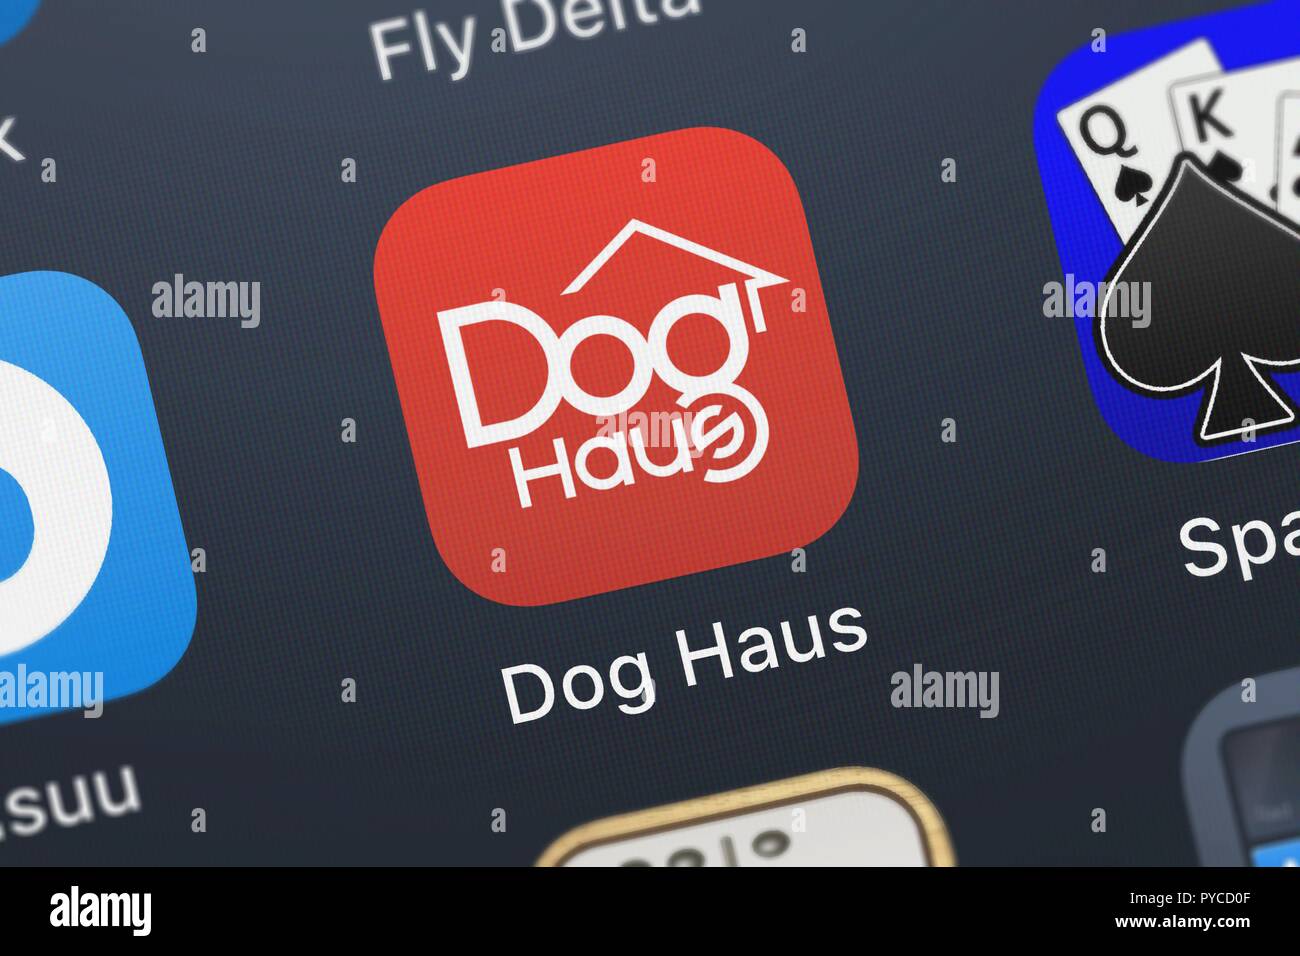 London, United Kingdom - October 26, 2018: The Dog Haus mobile app from LevelUp Consulting, LLC on an iPhone screen. Stock Photo